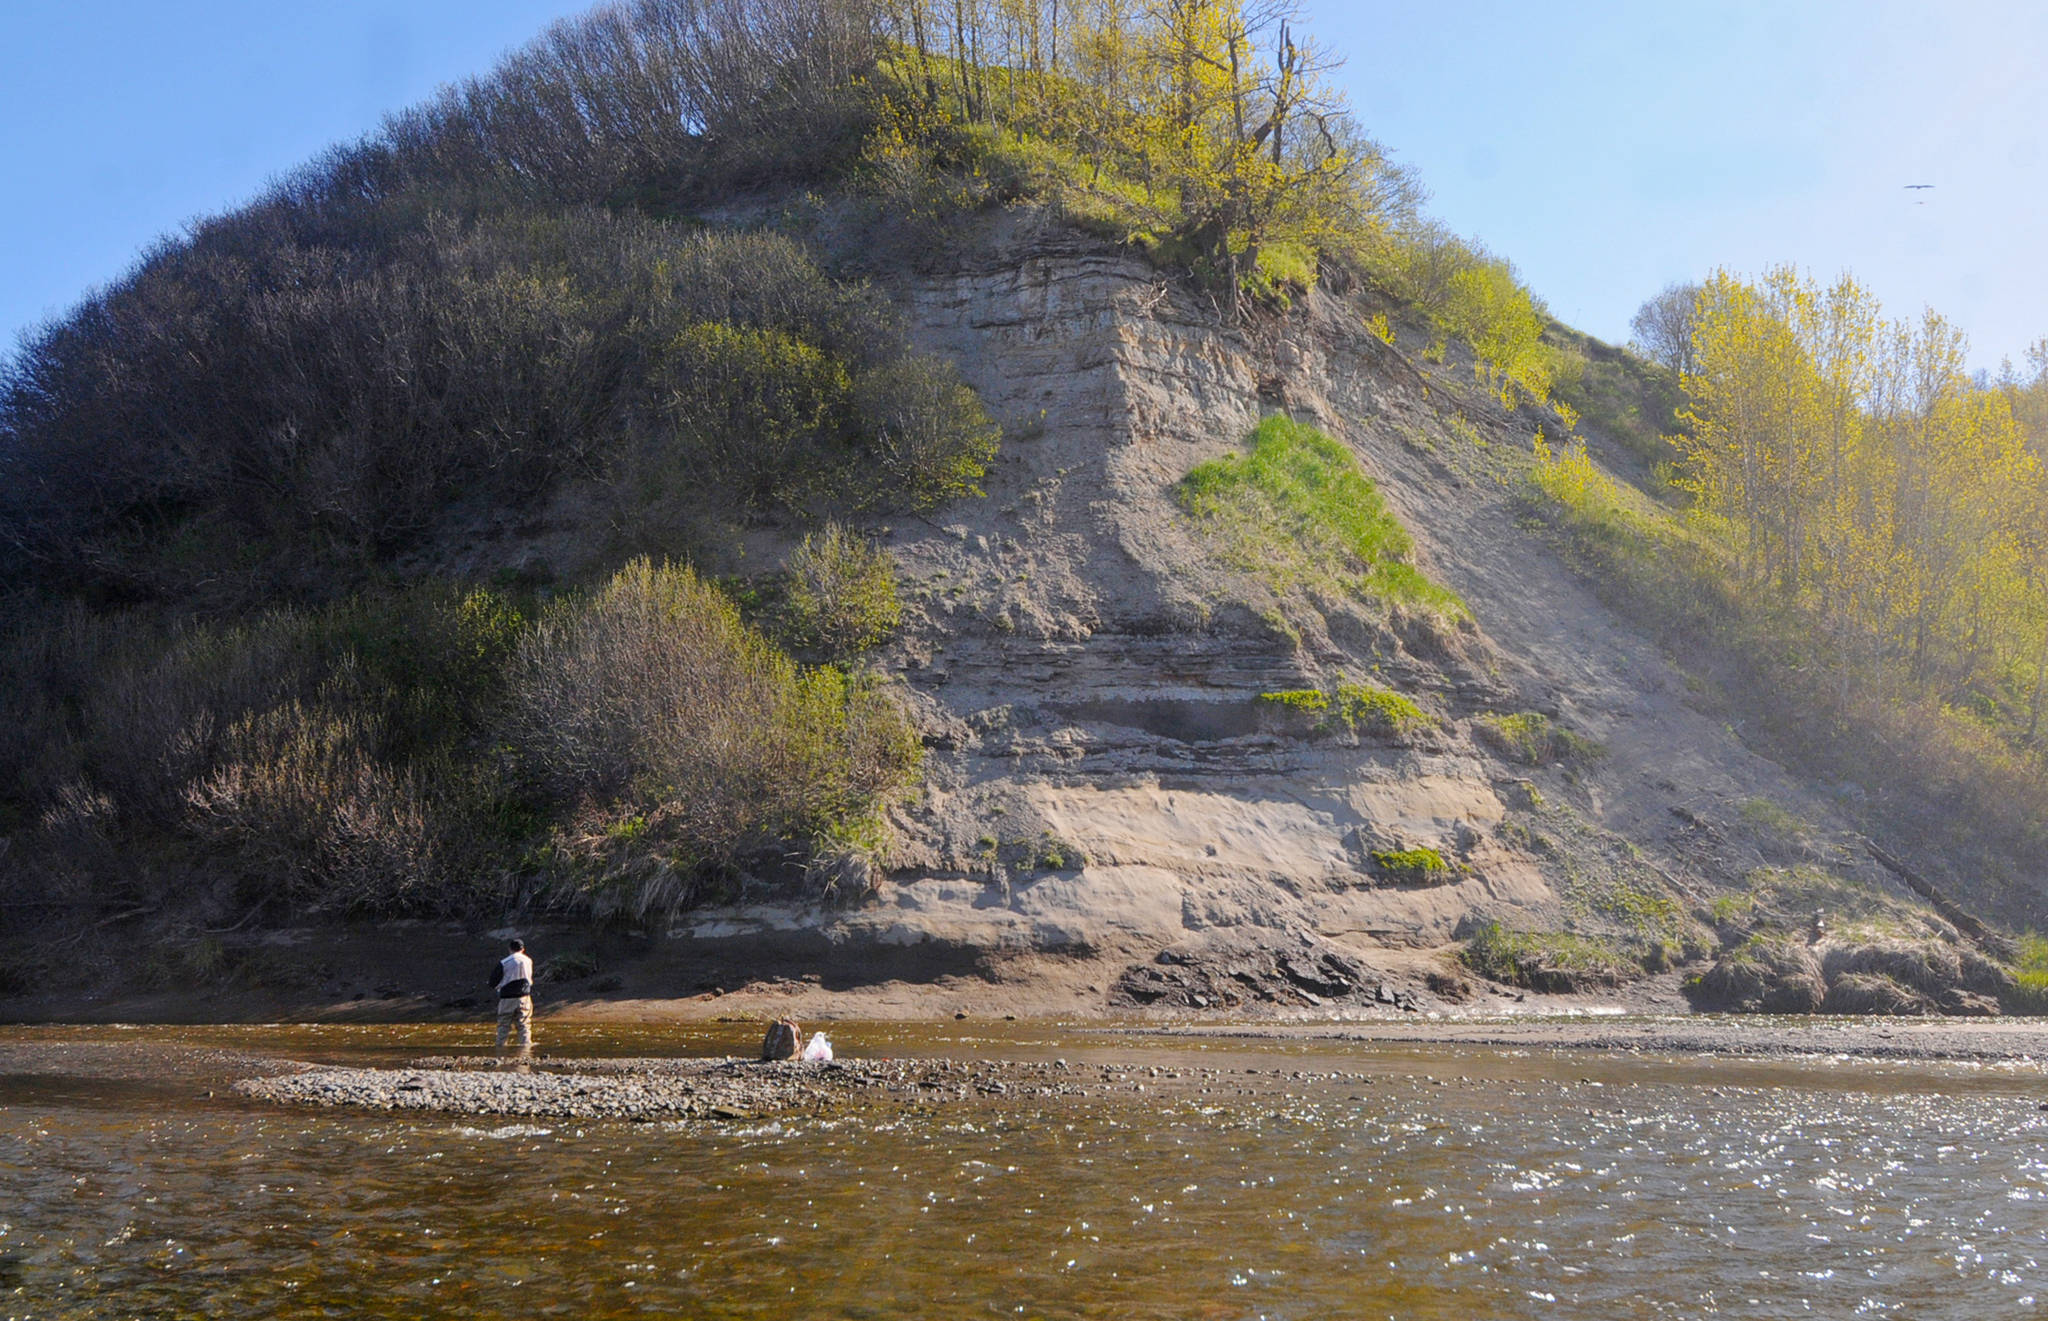 An angler tosses a line in the water near the mouth of Deep Creek on May 28 in Ninilchik. (Photo by Elizabeth Earl/Peninsula Clarion)